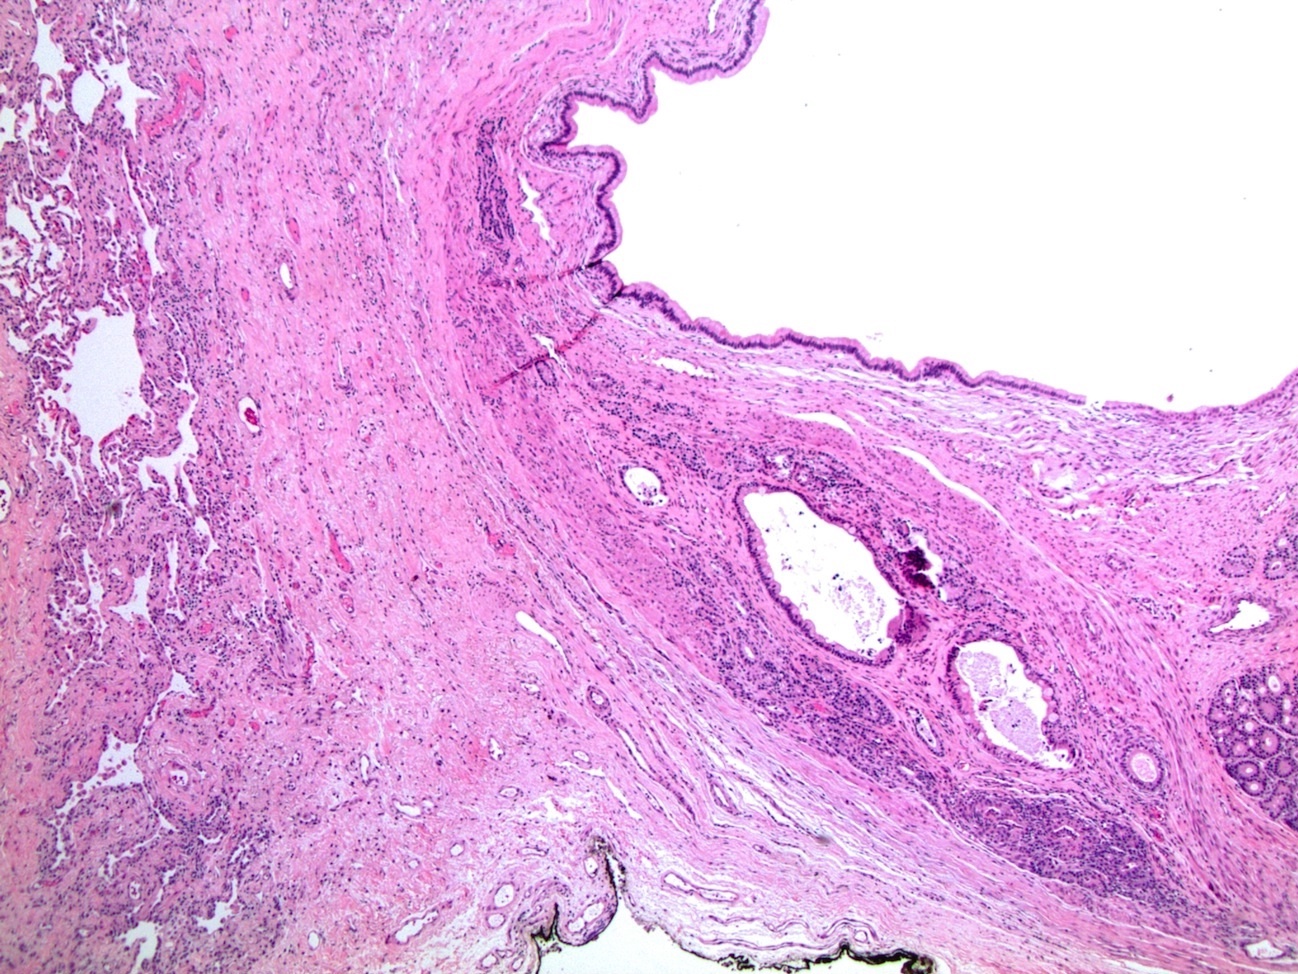 Testicular germ<br>cell tumor (teratoma)<br>metastatic to lung